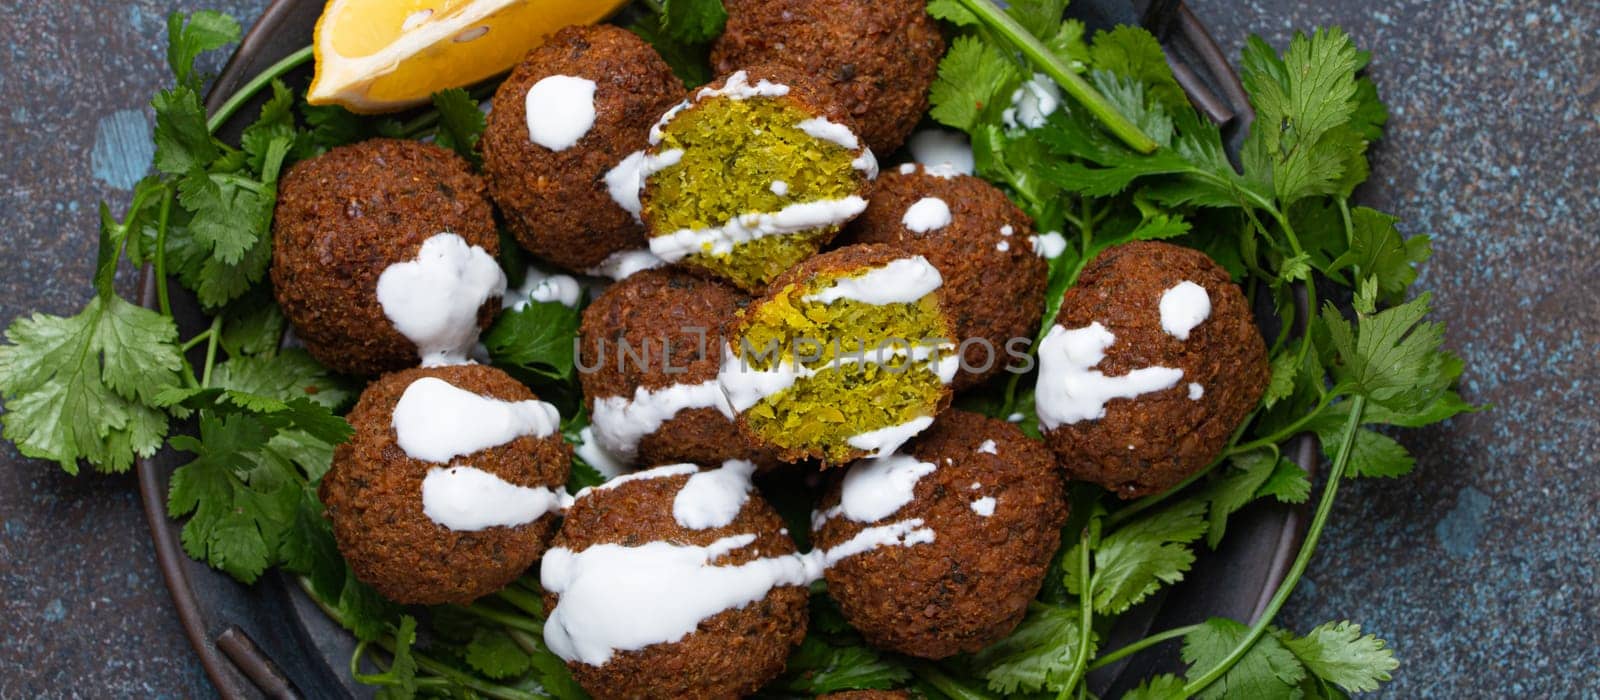 Plate of fried falafel balls served with fresh green cilantro and lemon, top view on rustic concrete background. Traditional vegan dish of Middle Eastern cuisine by its_al_dente